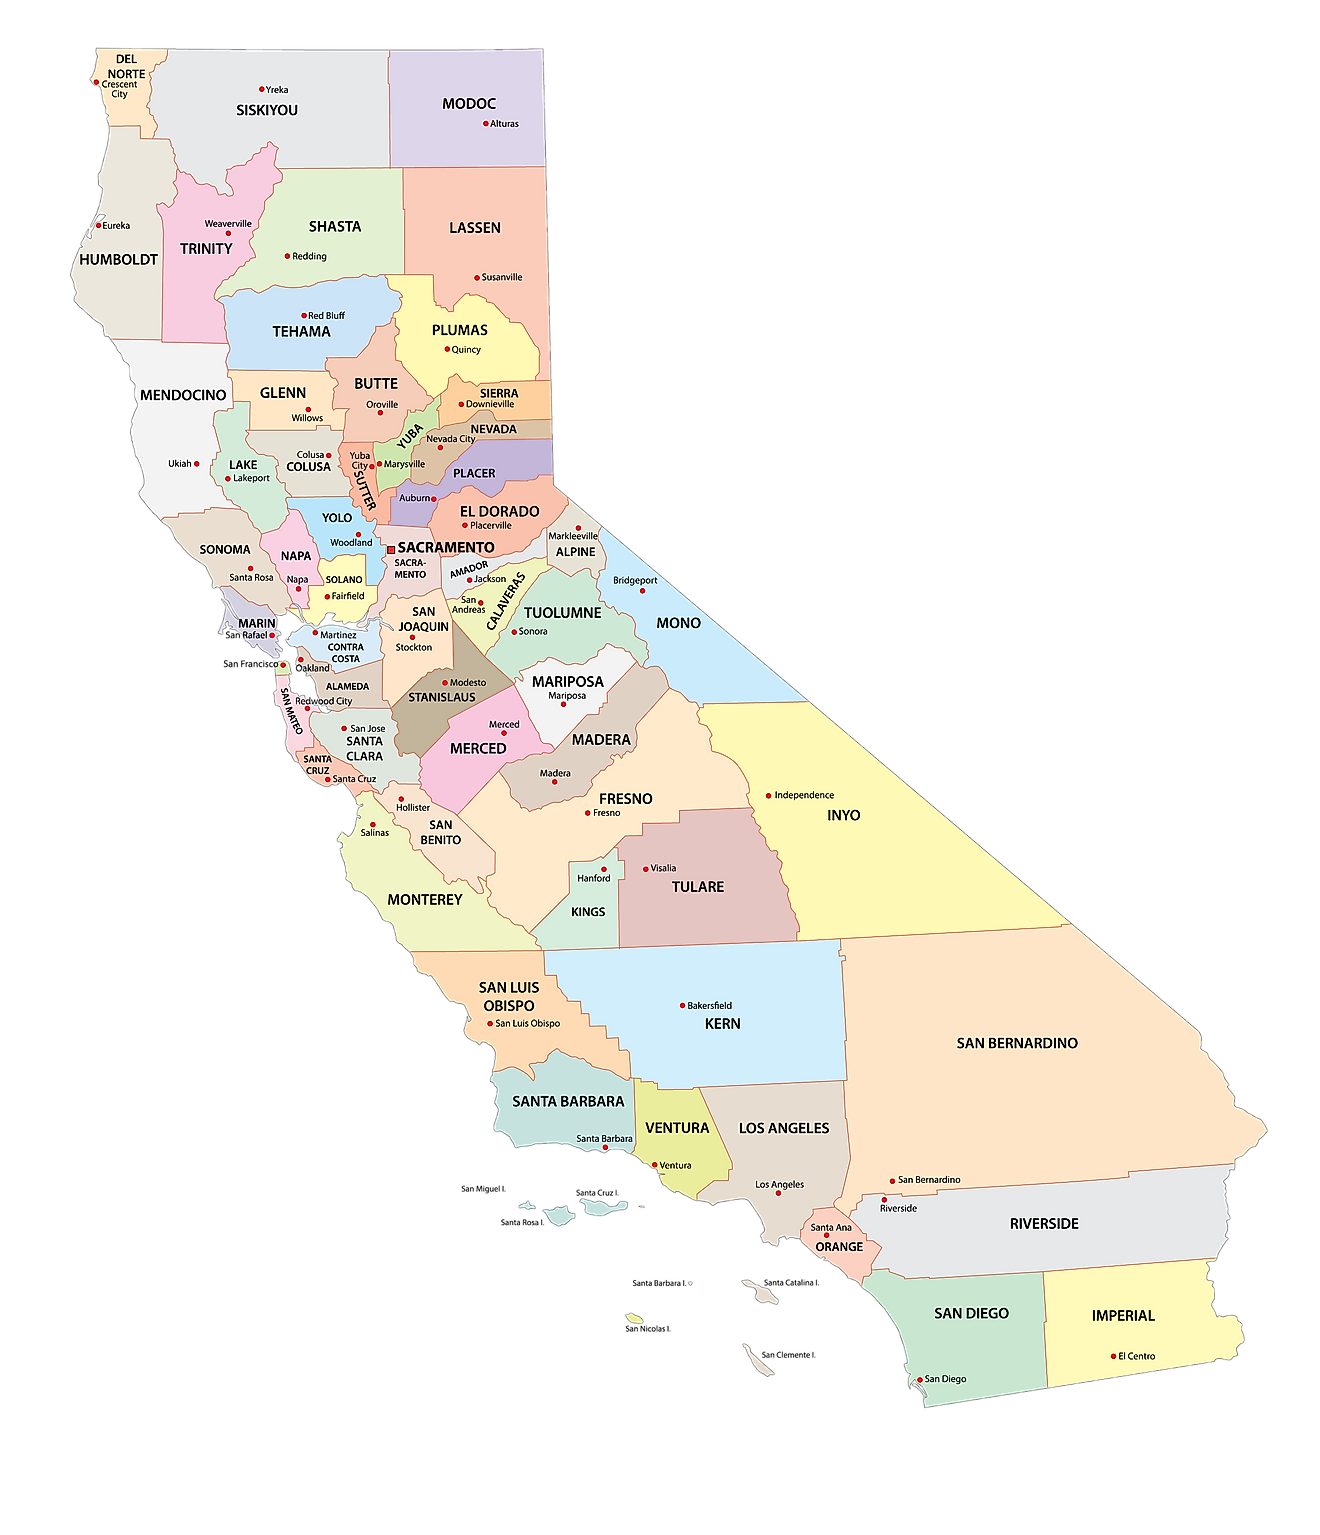 Administrative Map of California showing its 58 counties and the capital city - Sacramento